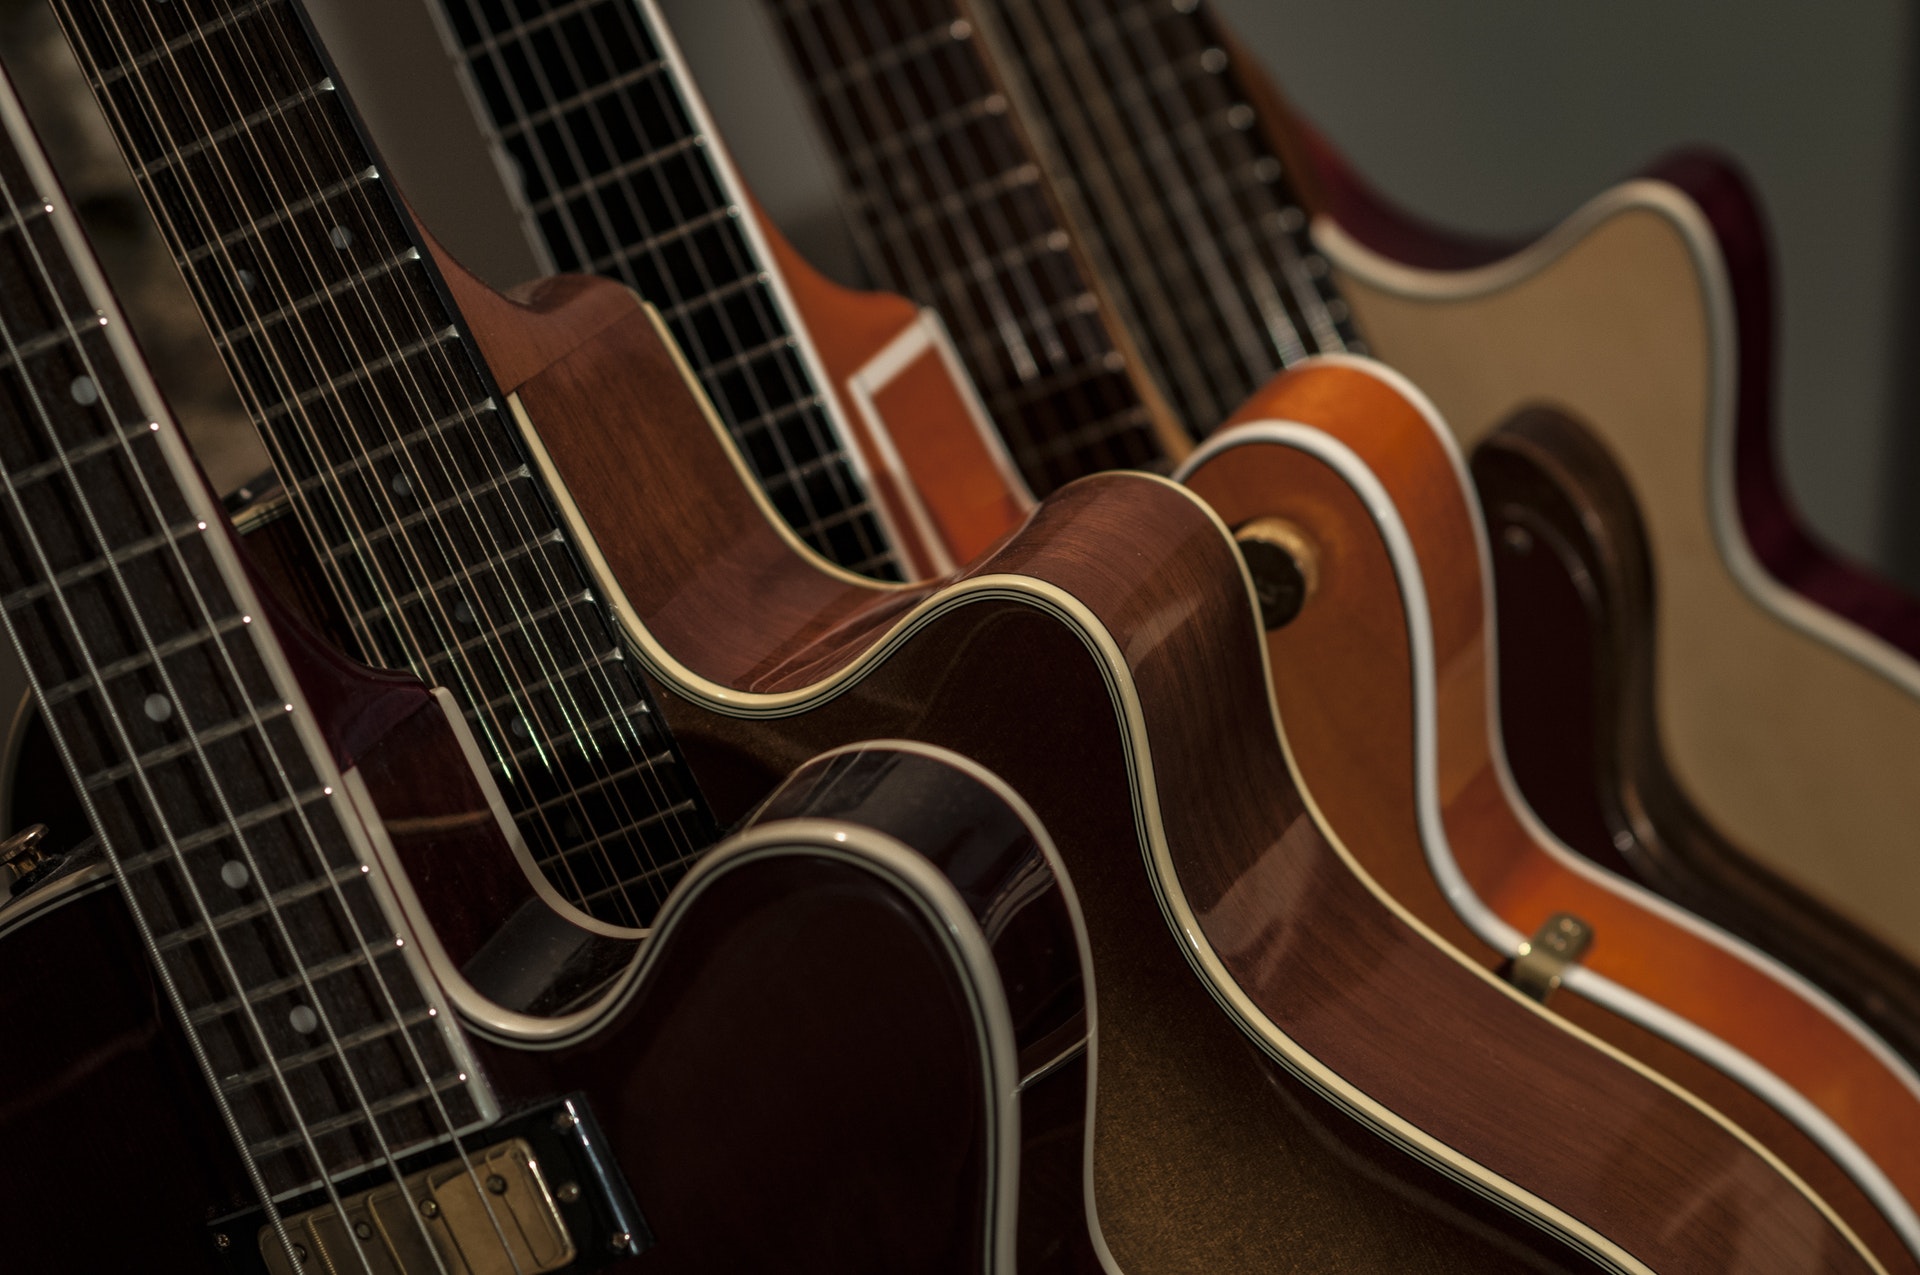 Why Do Guitarists Have So Many Guitars?